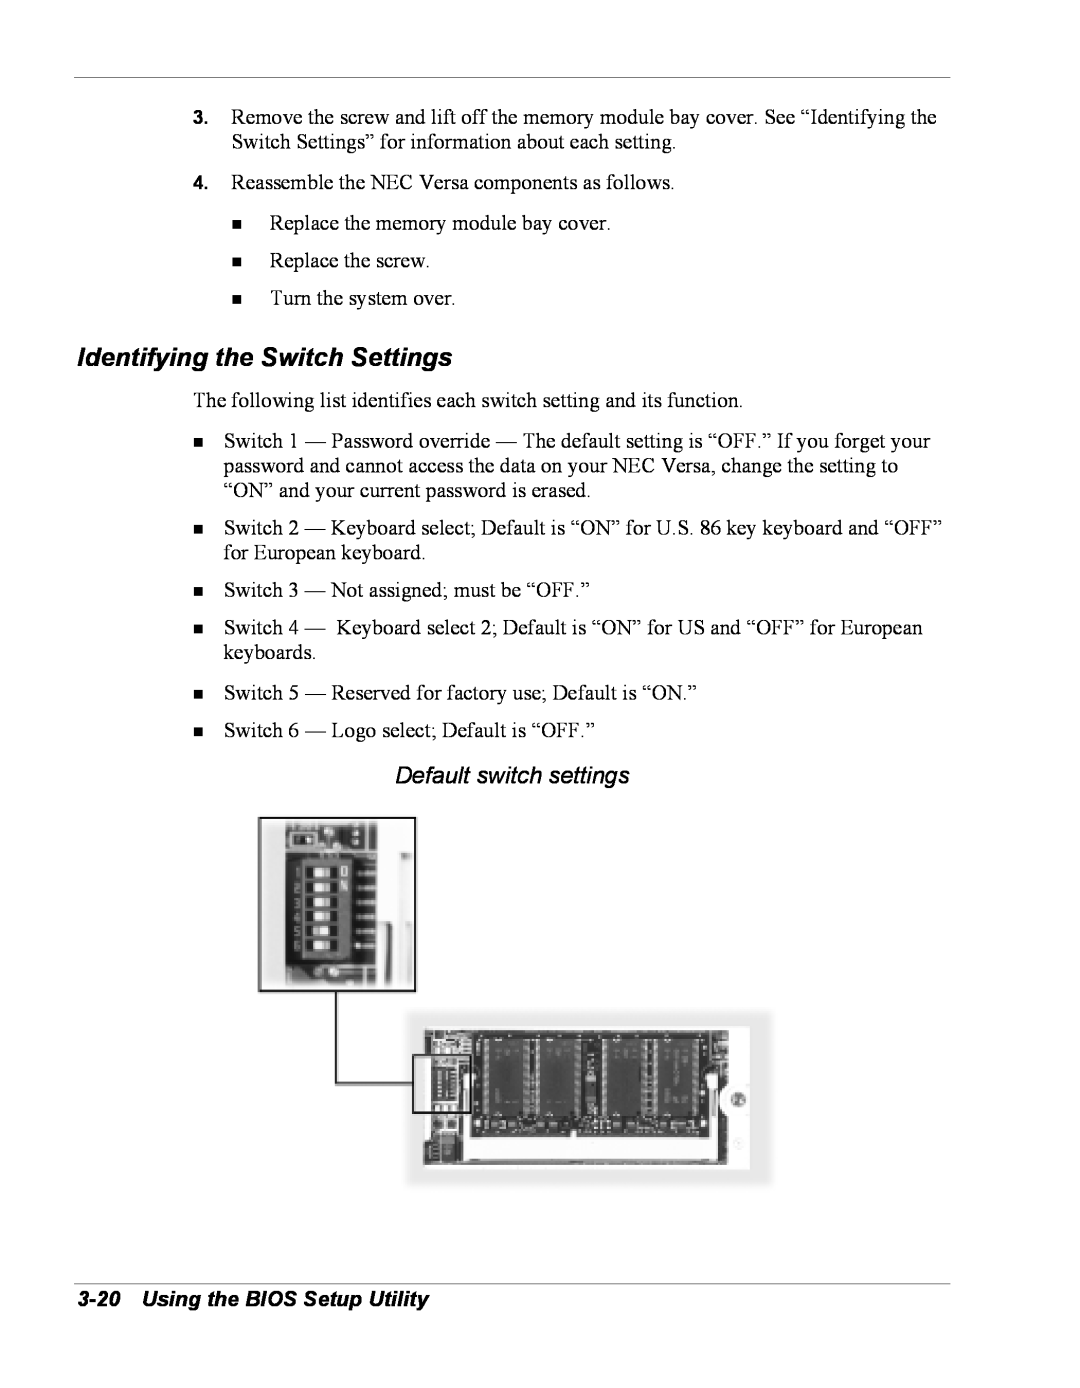 NEC Versa Series manual Identifying the Switch Settings, Default switch settings, Using the BIOS Setup Utility 